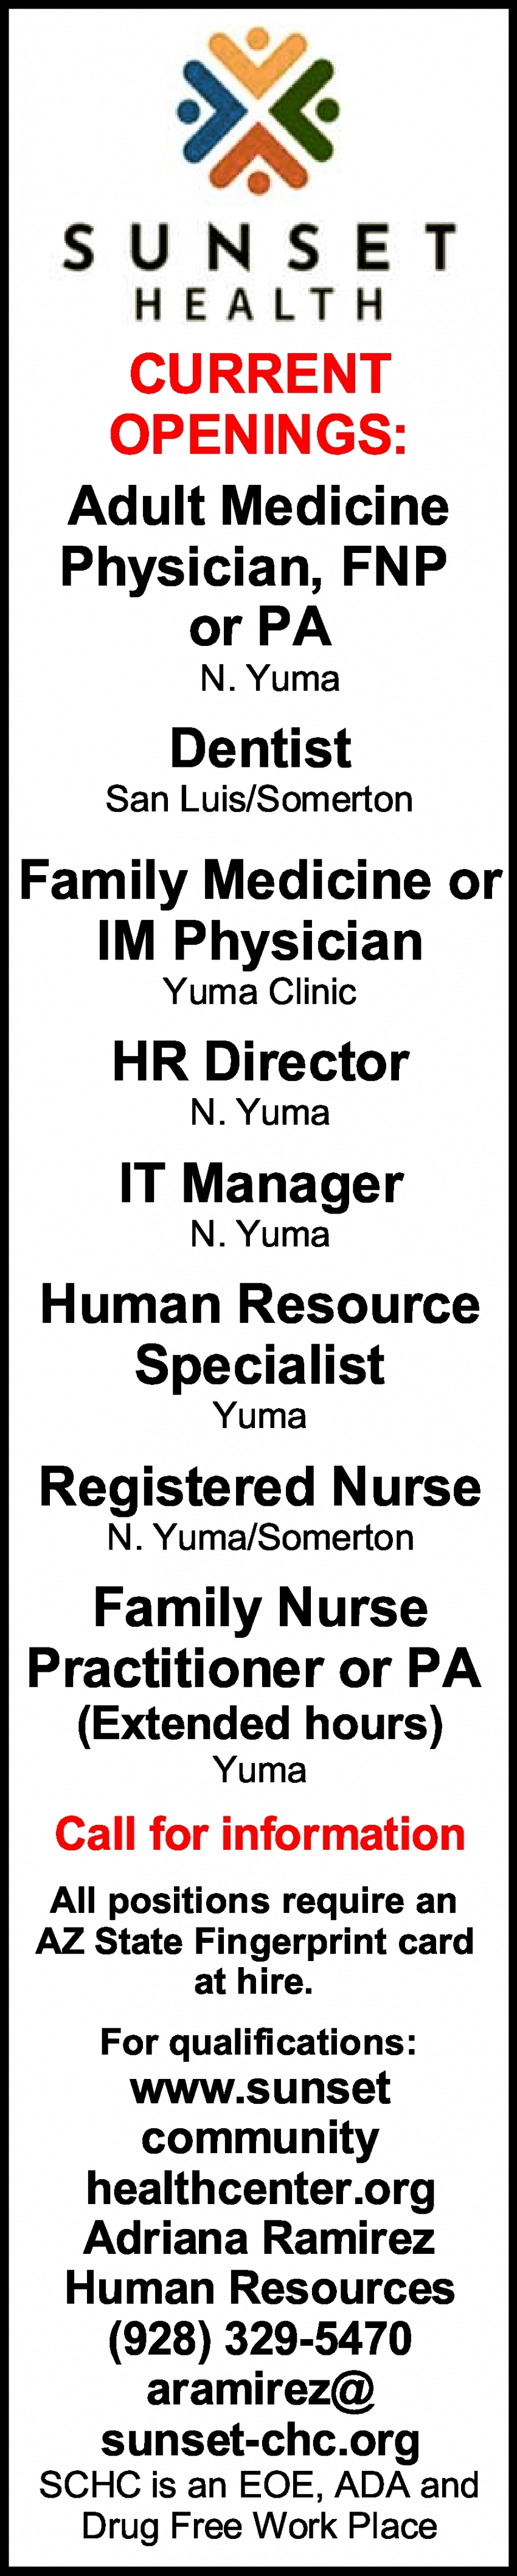 Care Nurse Manager - Human Resource Specialist - Medical Clerk Records